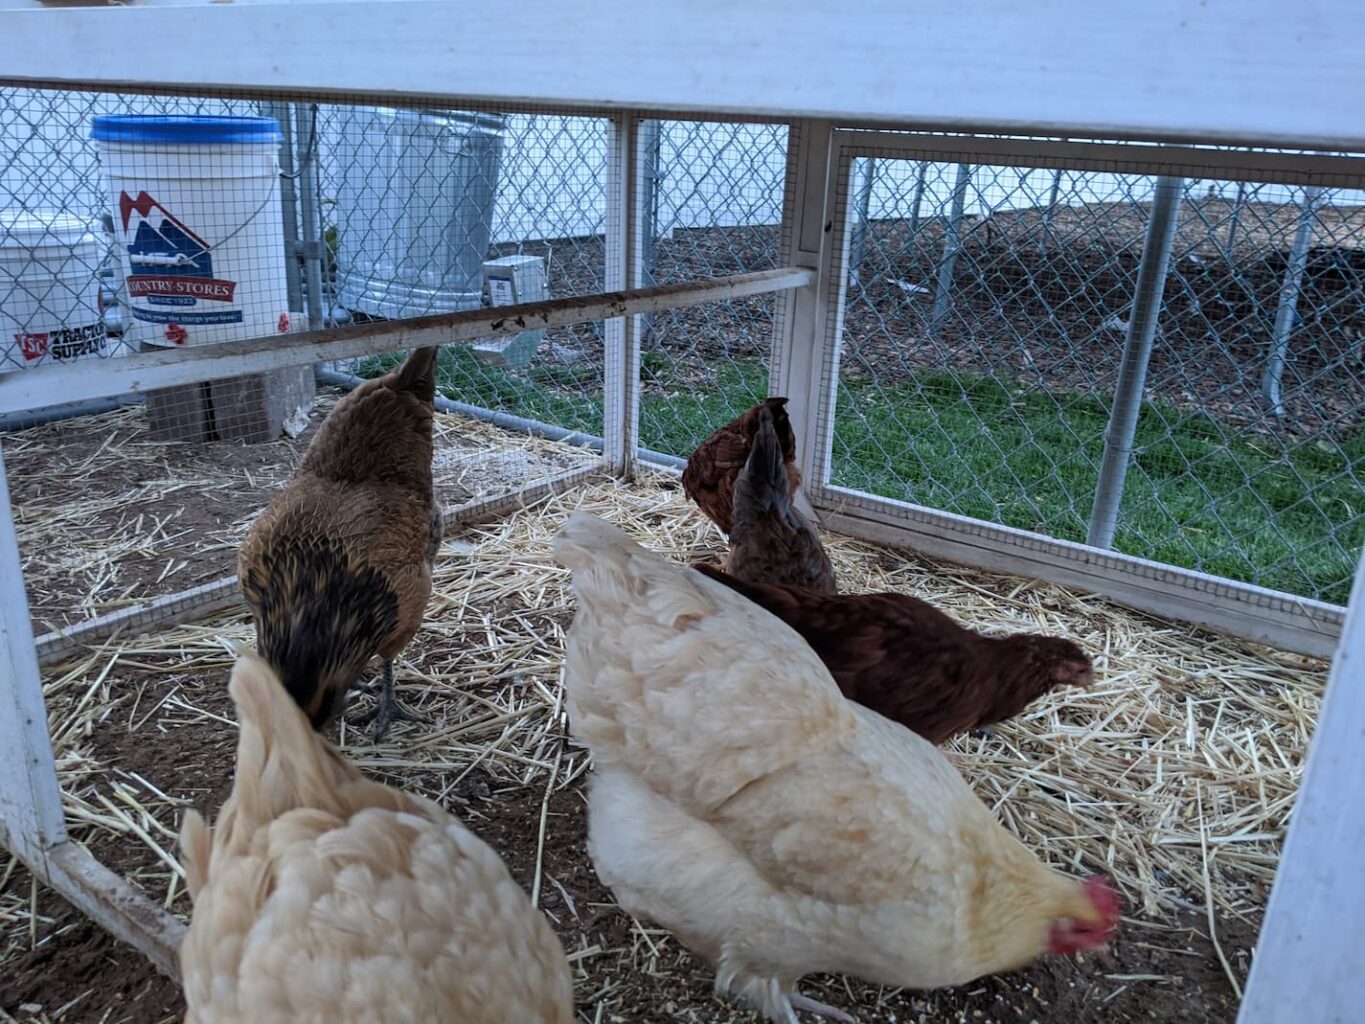 An image of chickens inside the coop looking for scratch.